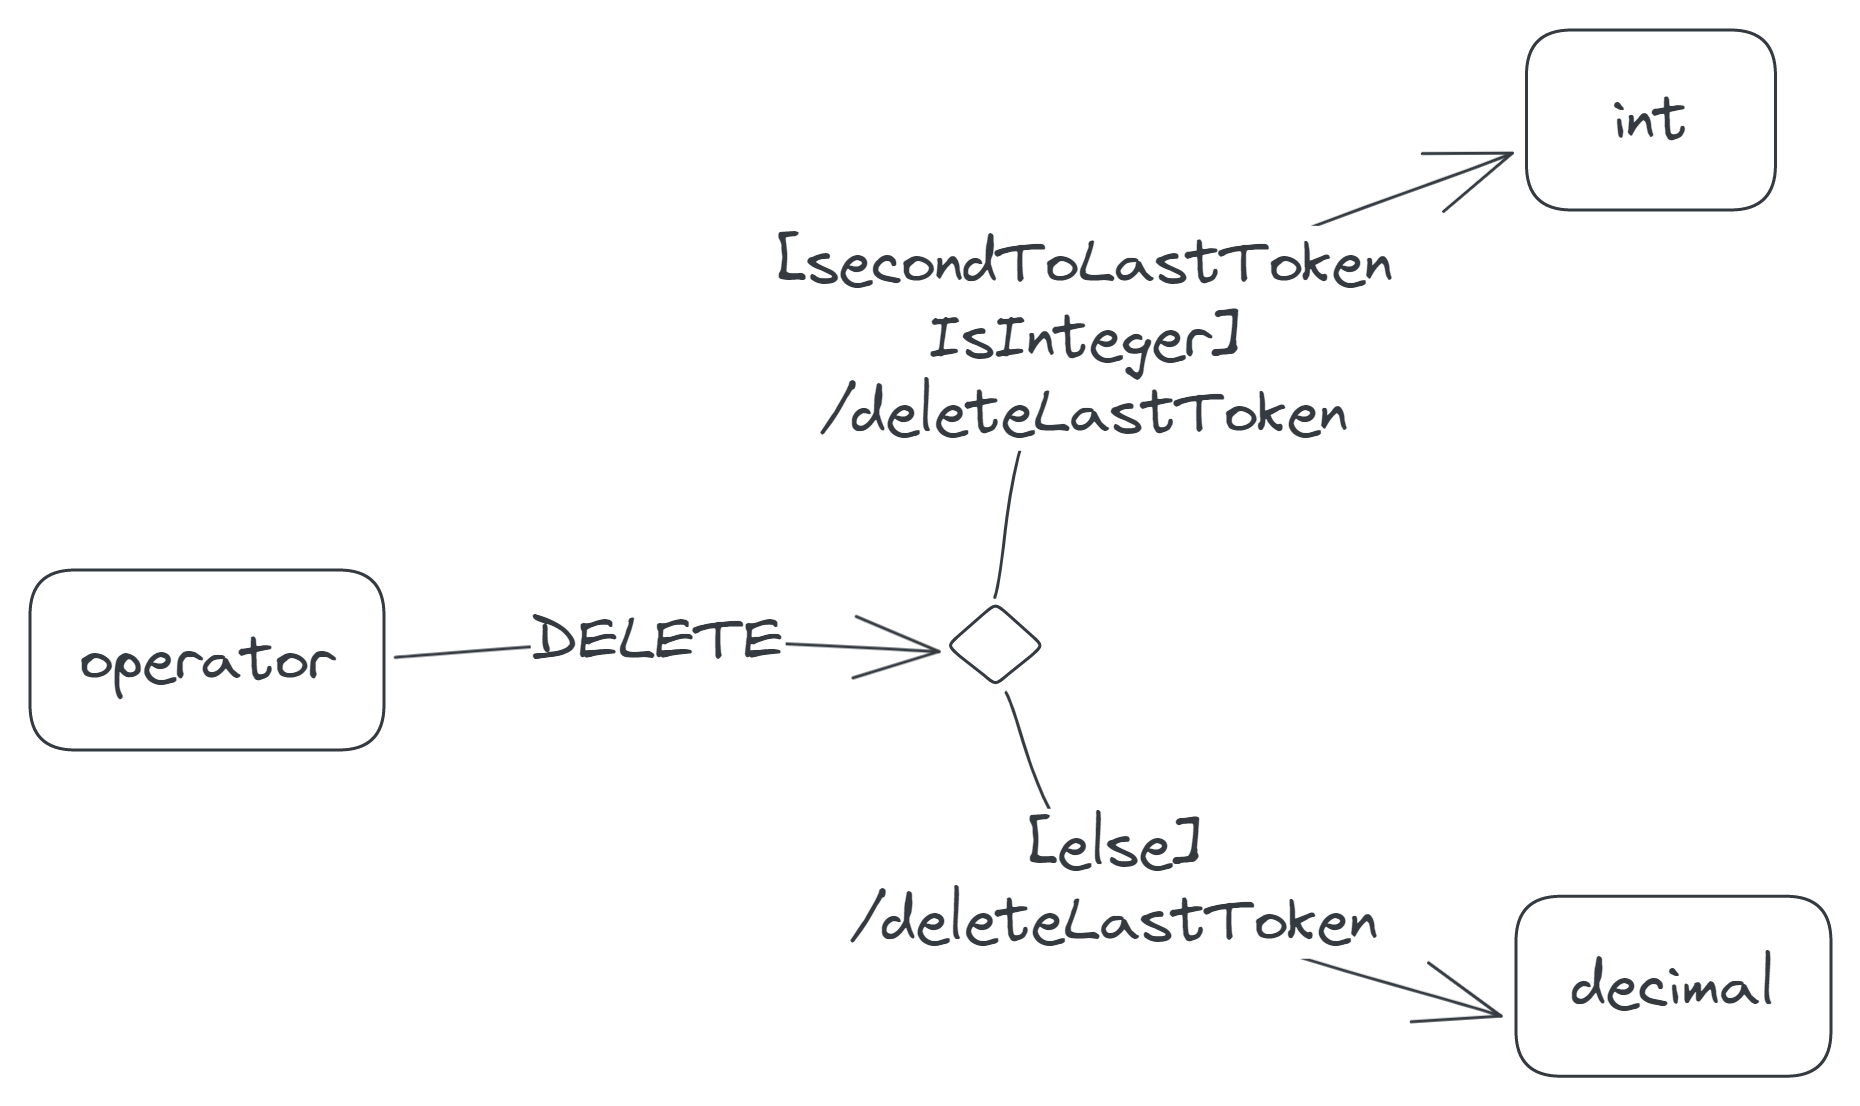 Two DELETE transitions from the operator state: one labelled '[secondToLastTokenIsInteger]/deleteLastToken' entering the int state, and another labelled '[else]/deleteLastToken' entering the decimal state.